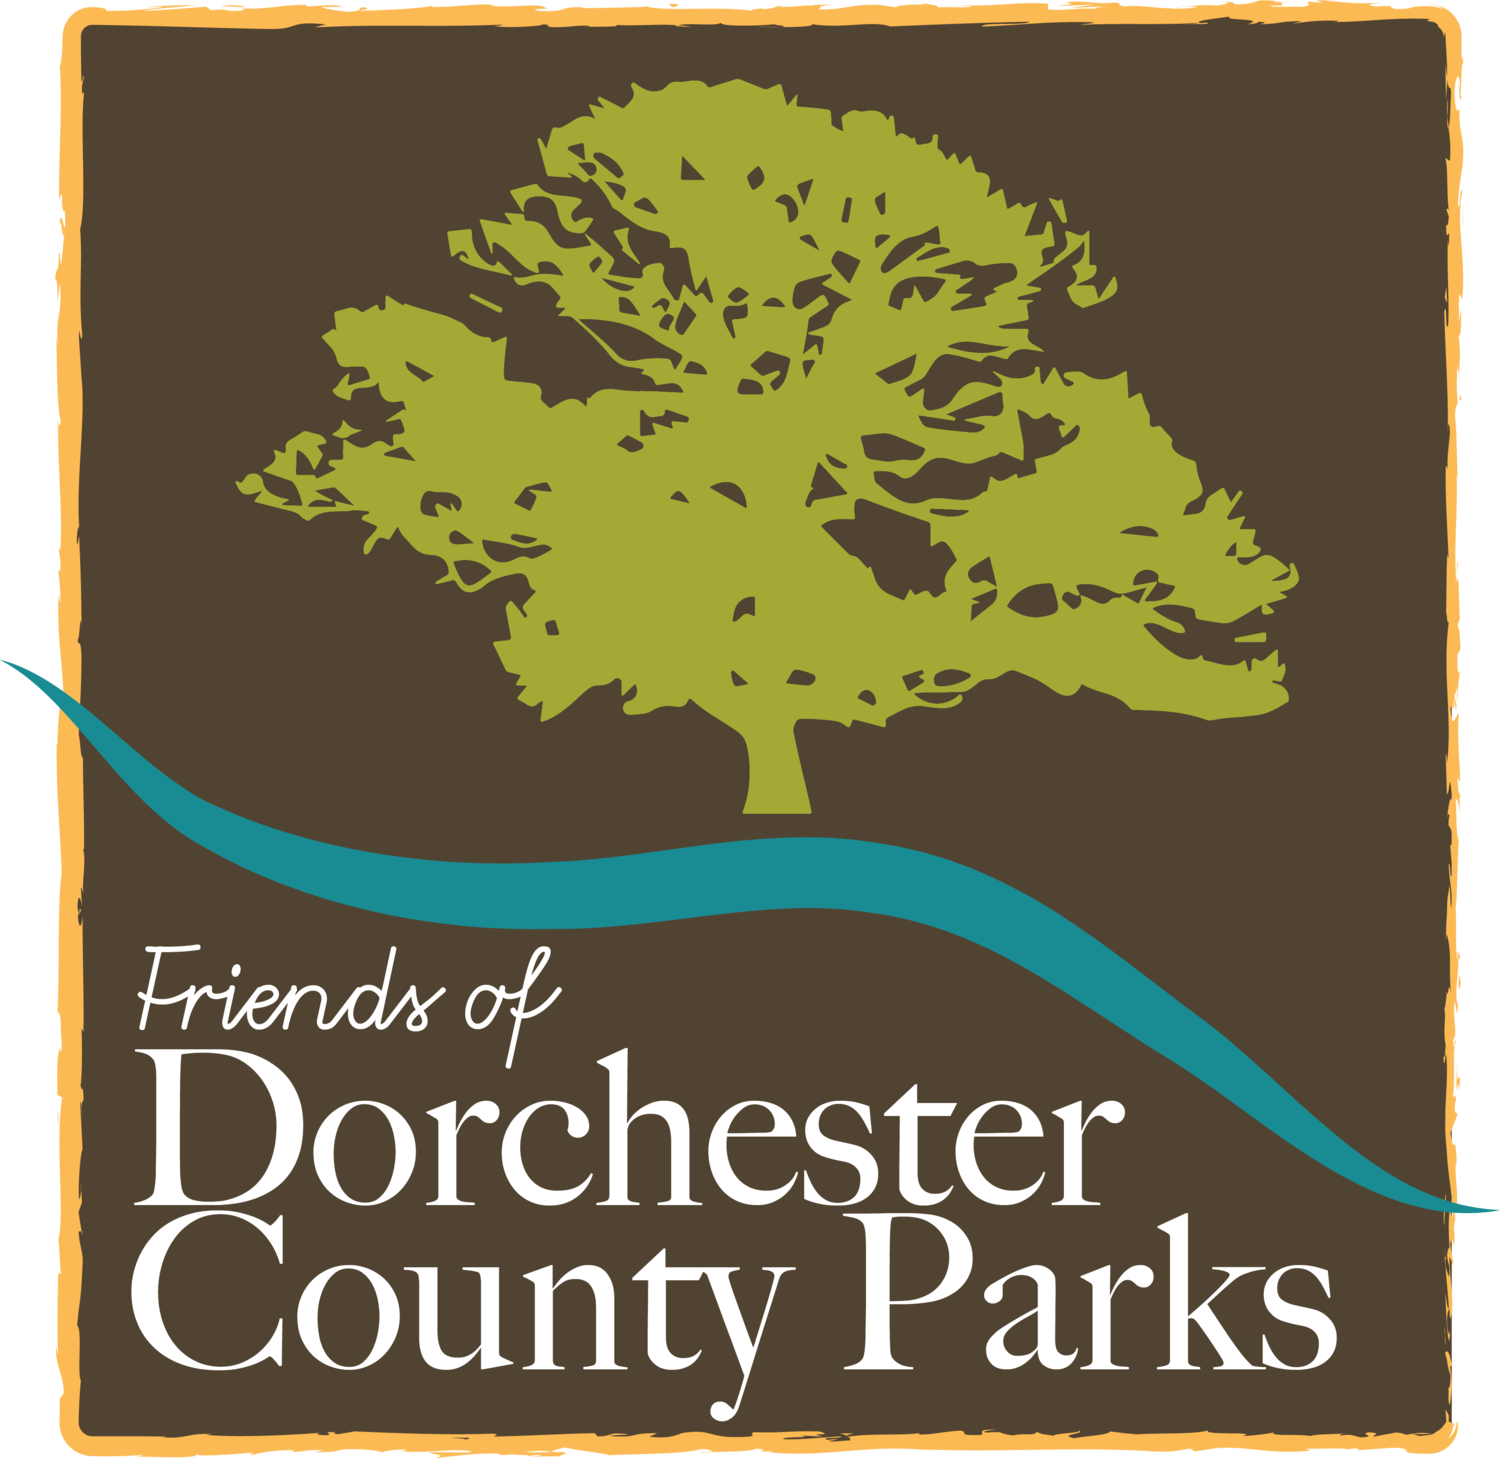 Friends of Dorchester County Parks